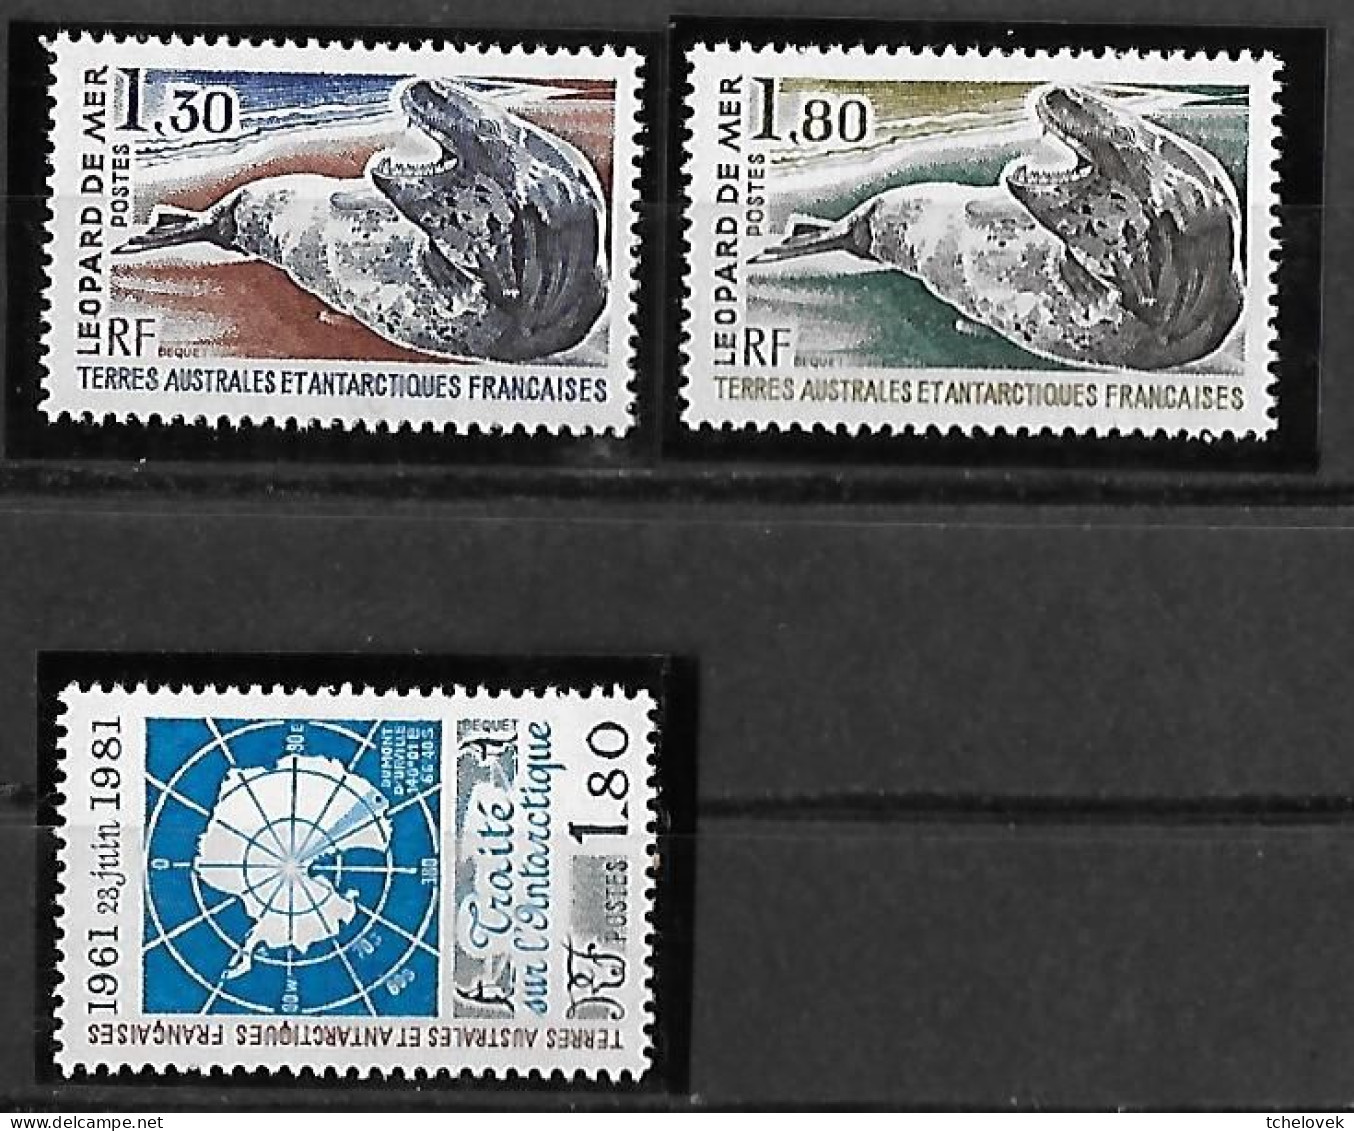 TAAF FSAT. Yt N° 89, 90 & 91 & Yt N° 92, 93, 94, 95, 96 Helicoptere - Unused Stamps